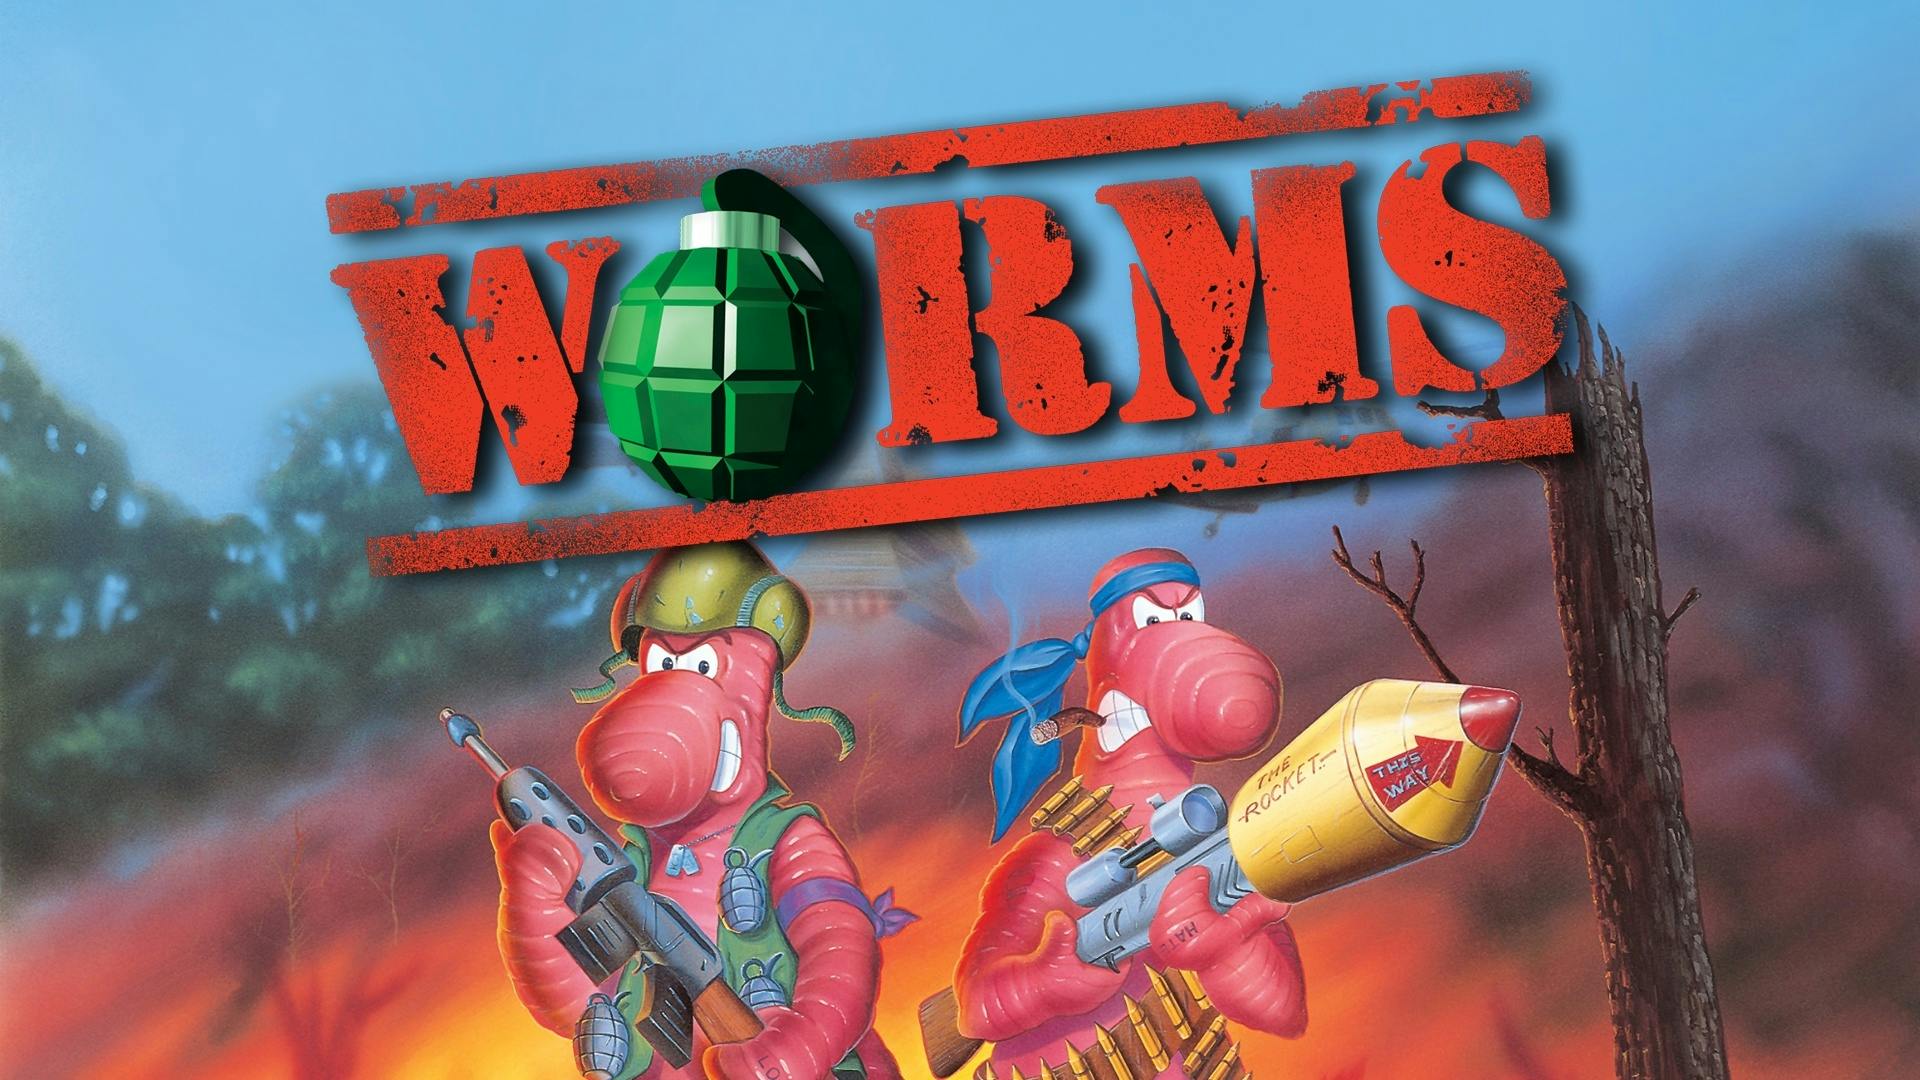 Steam worms ultimate фото 79